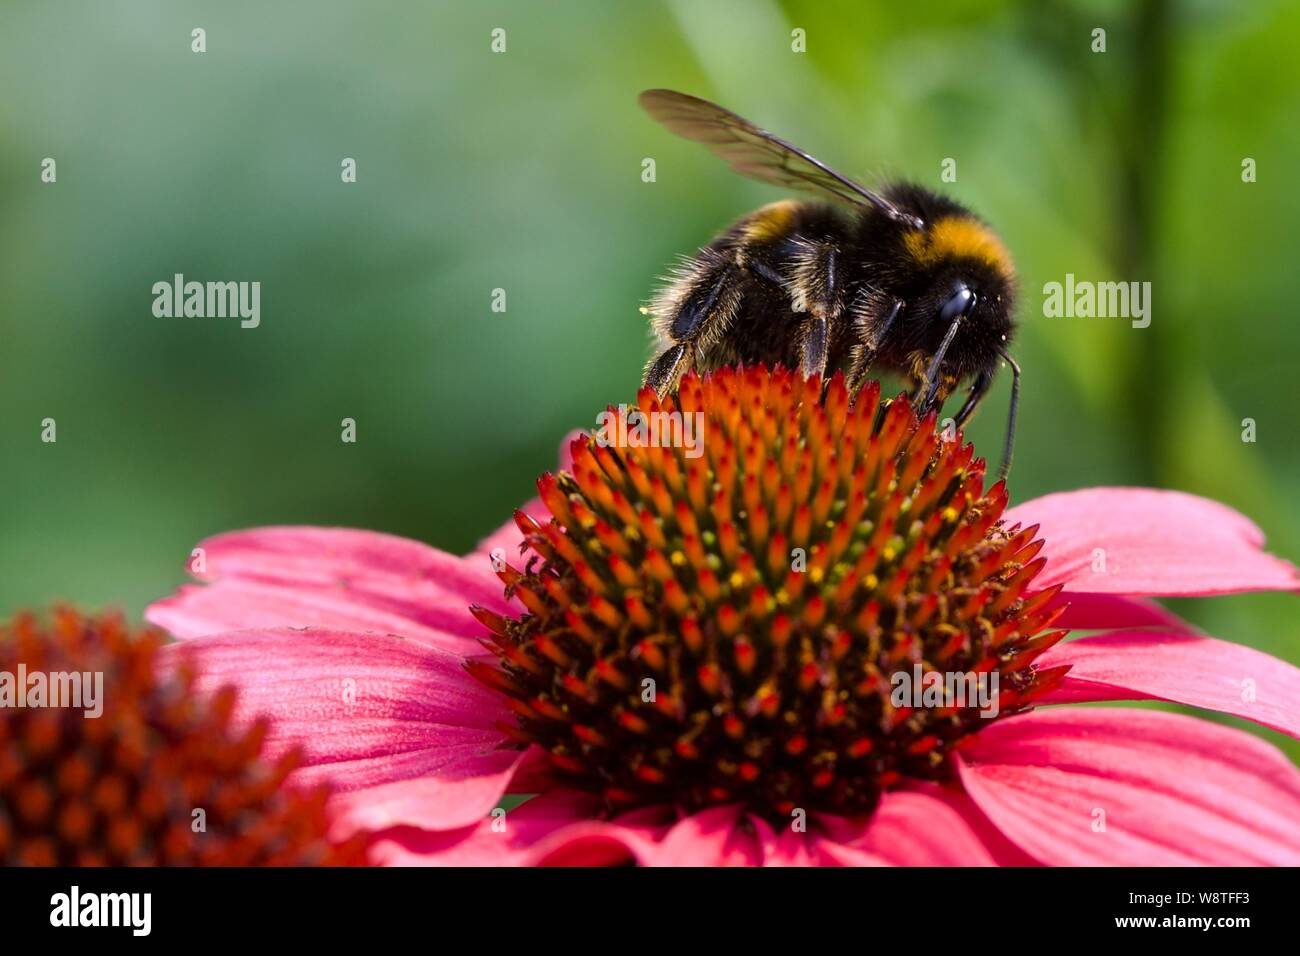 Bumblebee pollinisant un oodz' Echinacea 'Mconfortable Banque D'Images